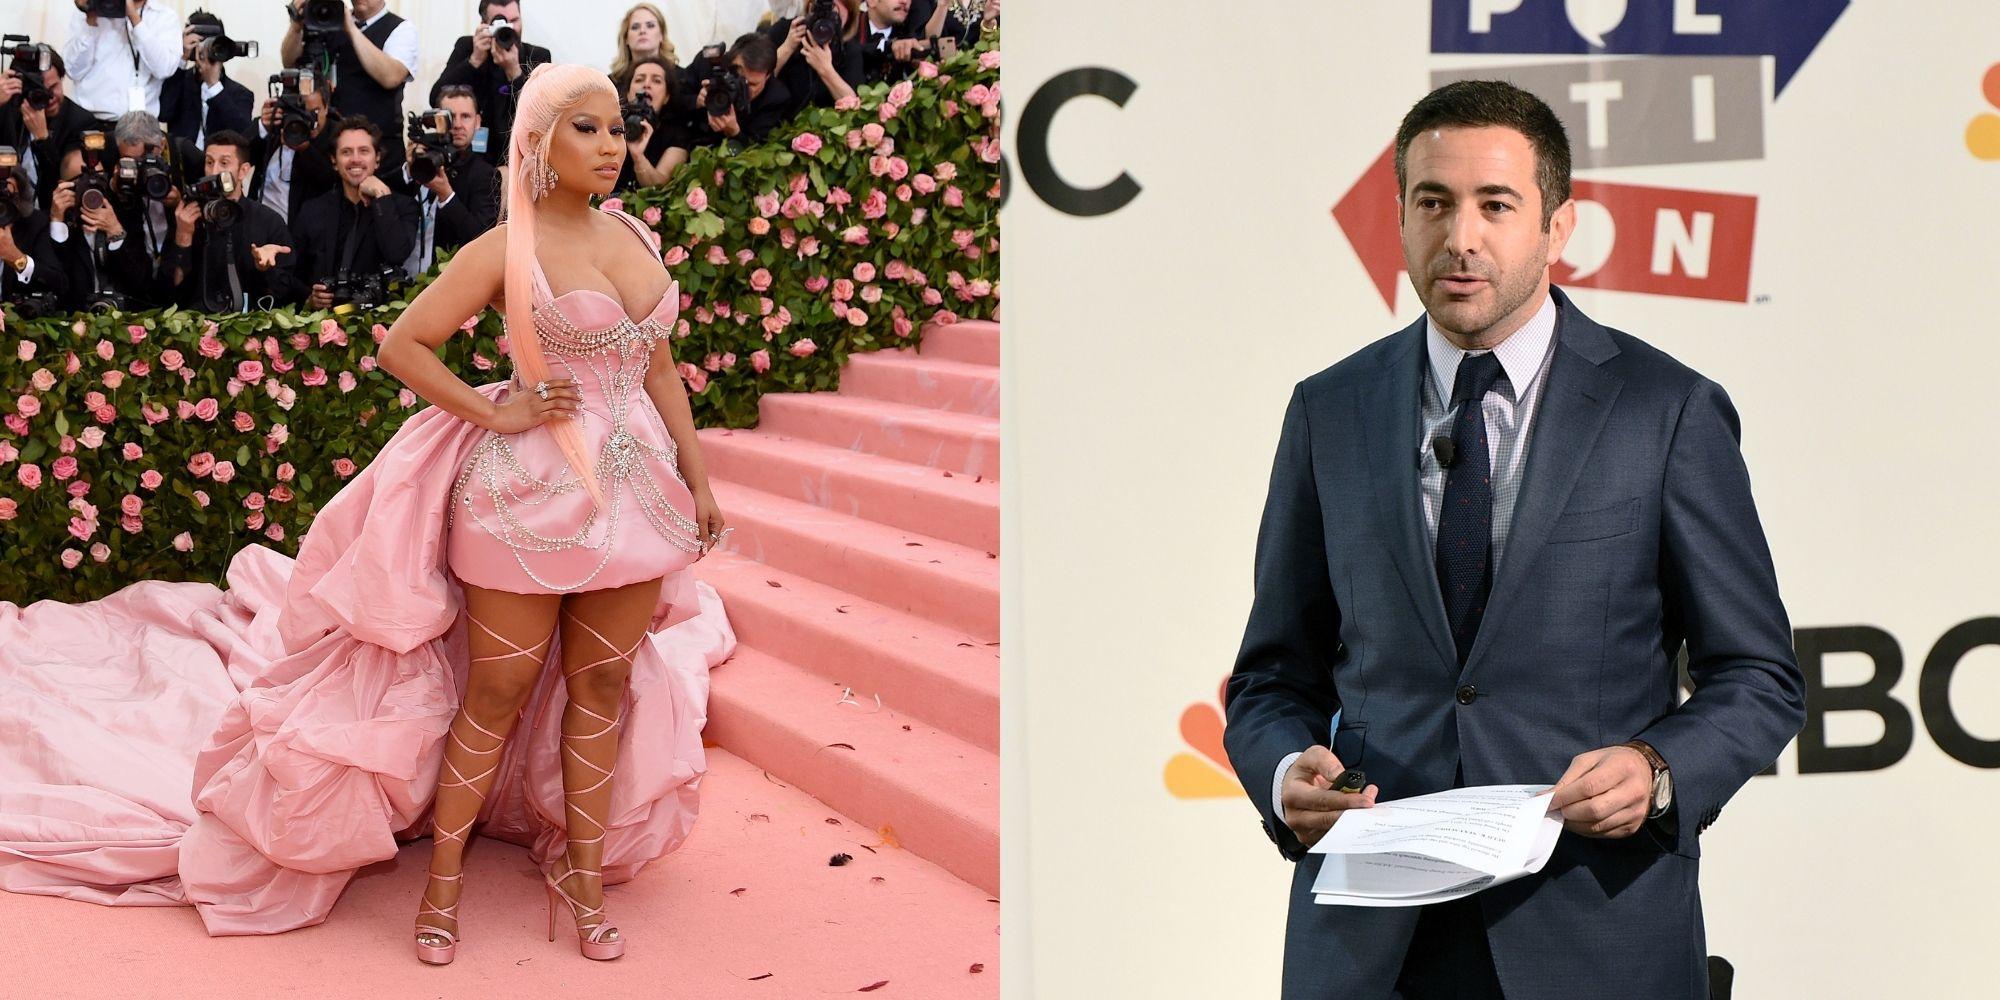 lawyer-goes-viral-after-quoting-a-nicki-minaj-verse-to-take-down-trump-on-live-tv